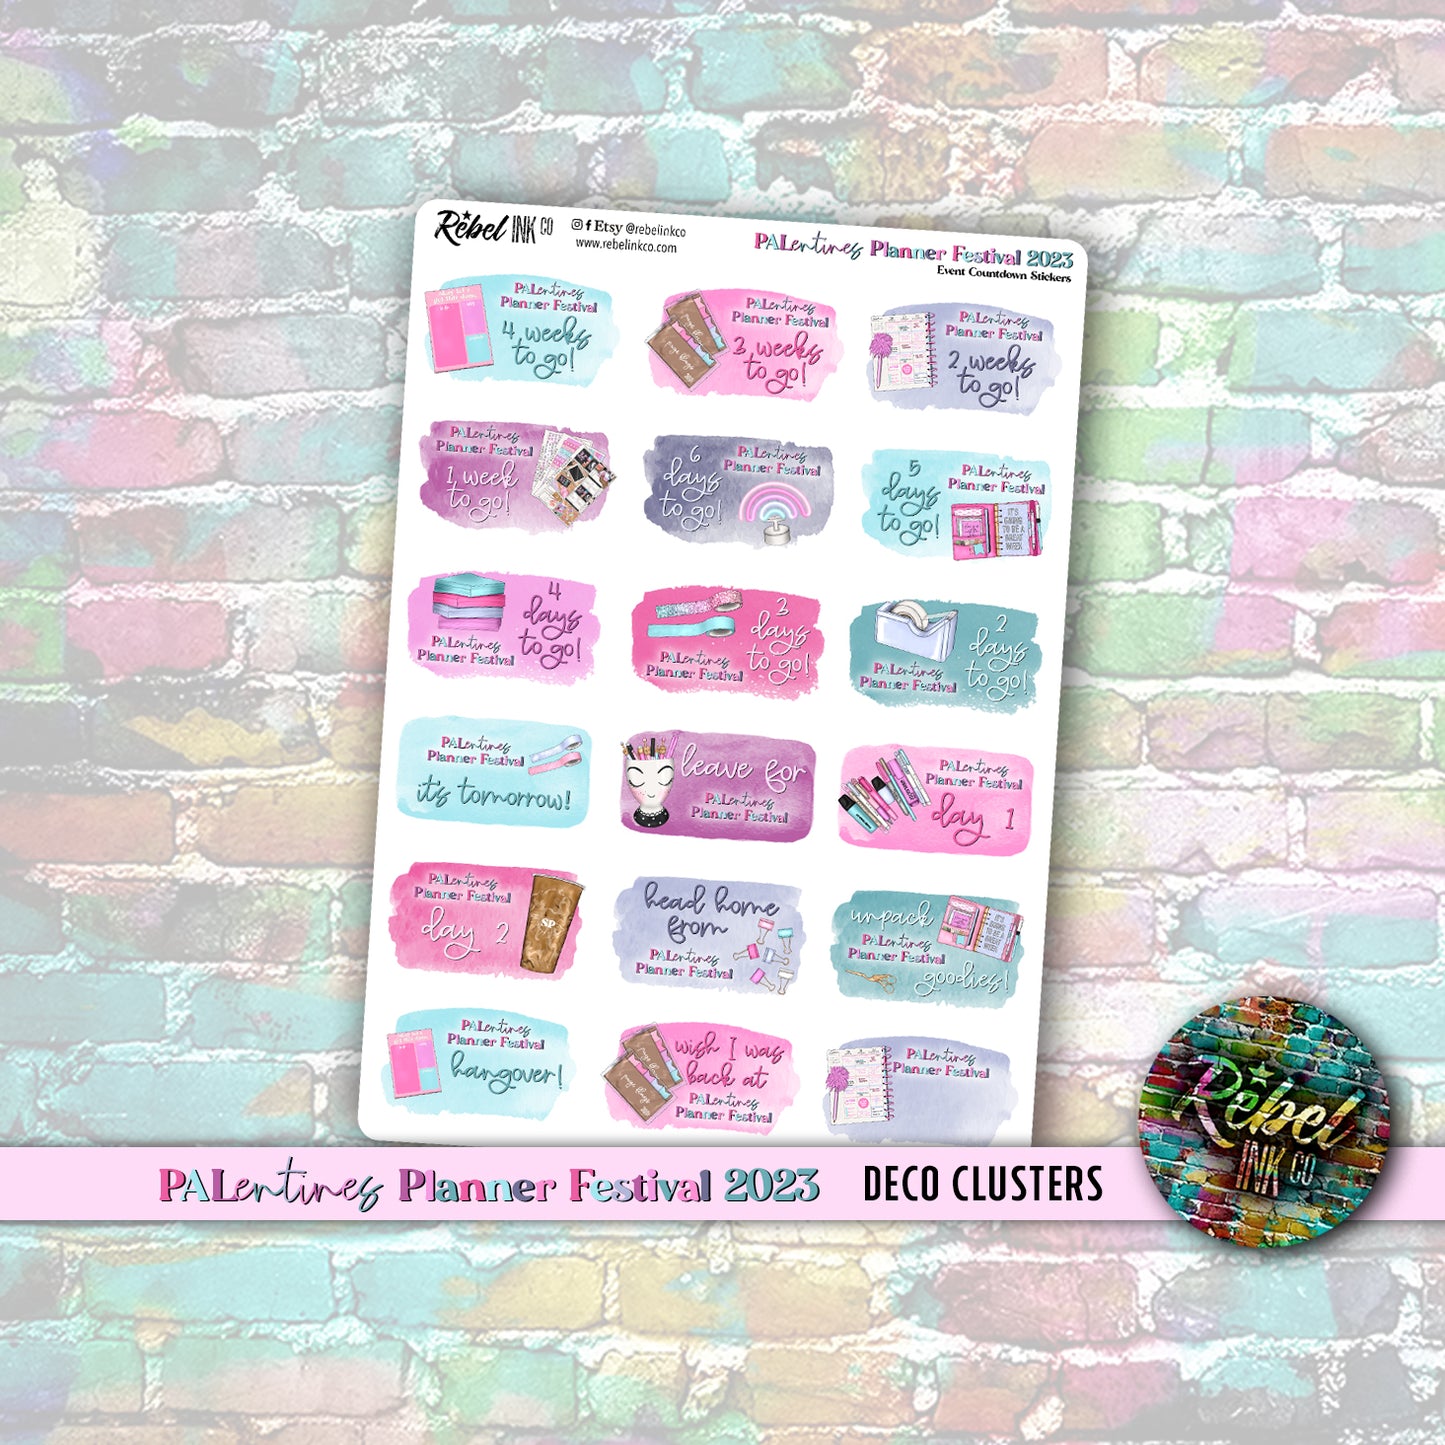 Palentines Planner Festival OFFICIAL - Event Countdown Stickers